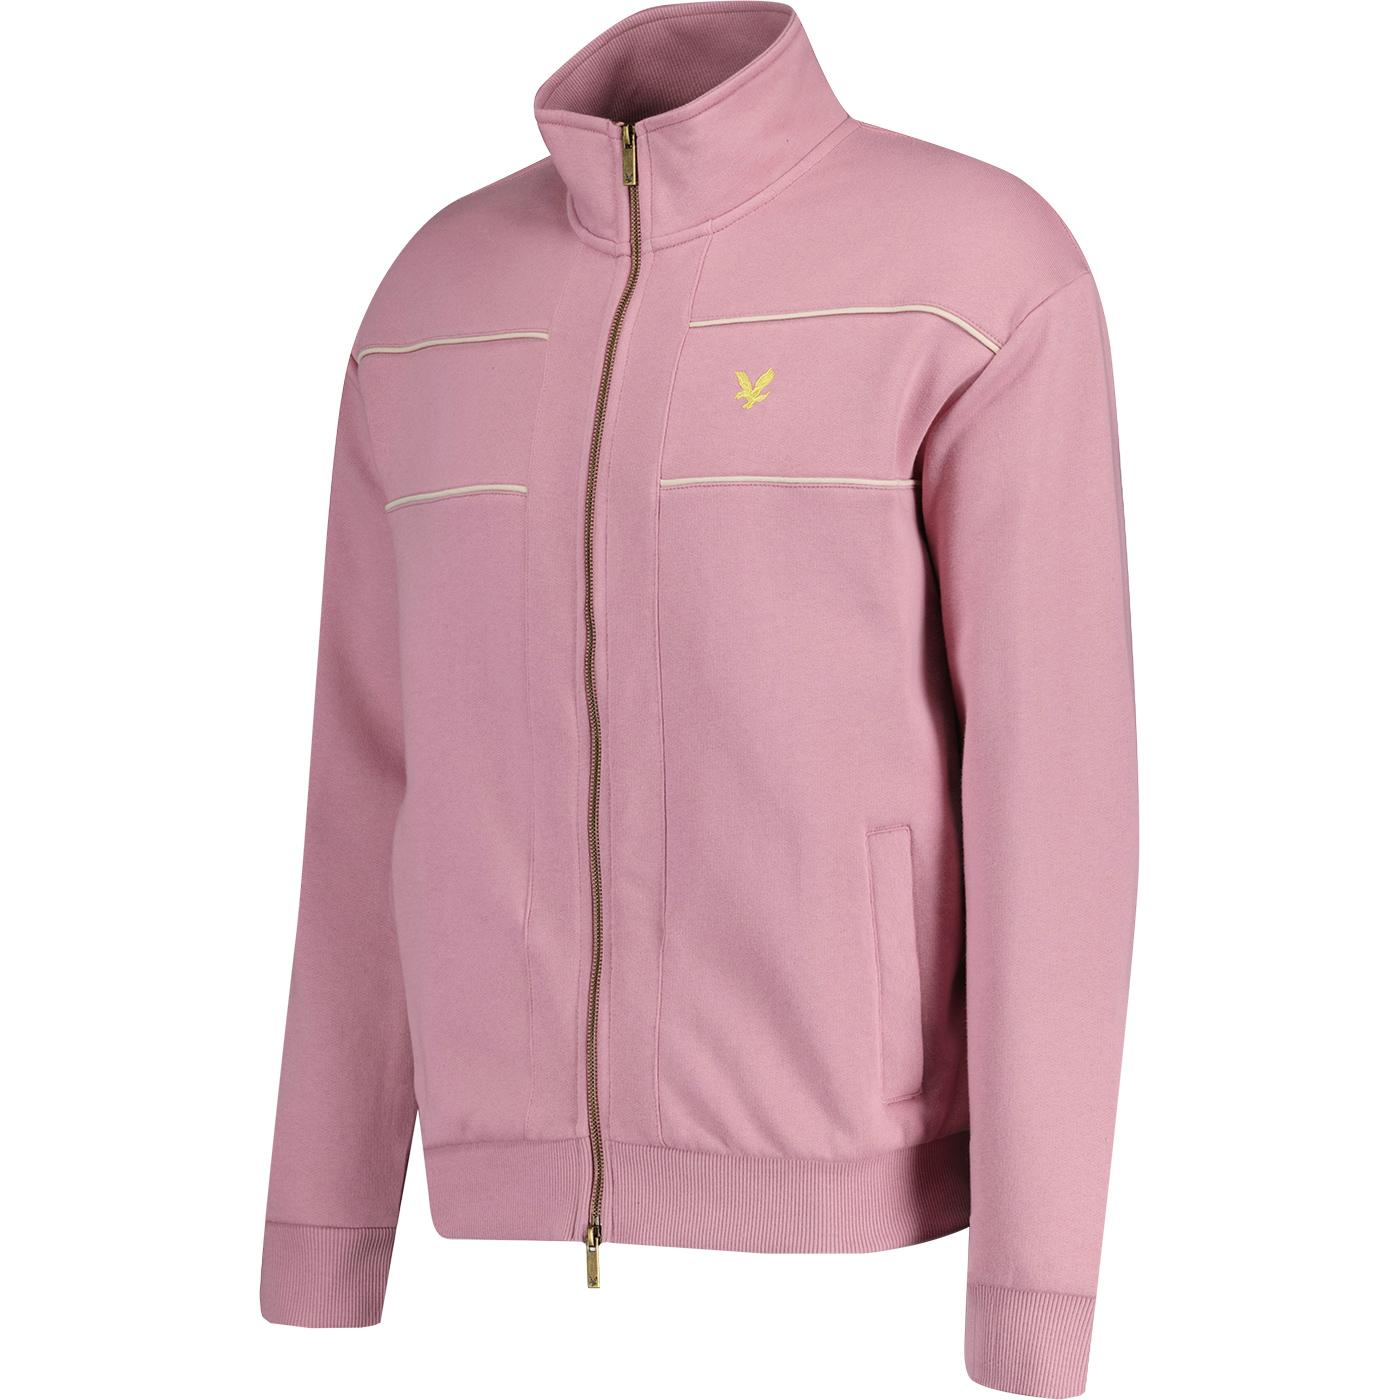 LYLE & SCOTT Archive Retro 90s Track Top Jacket in Pink